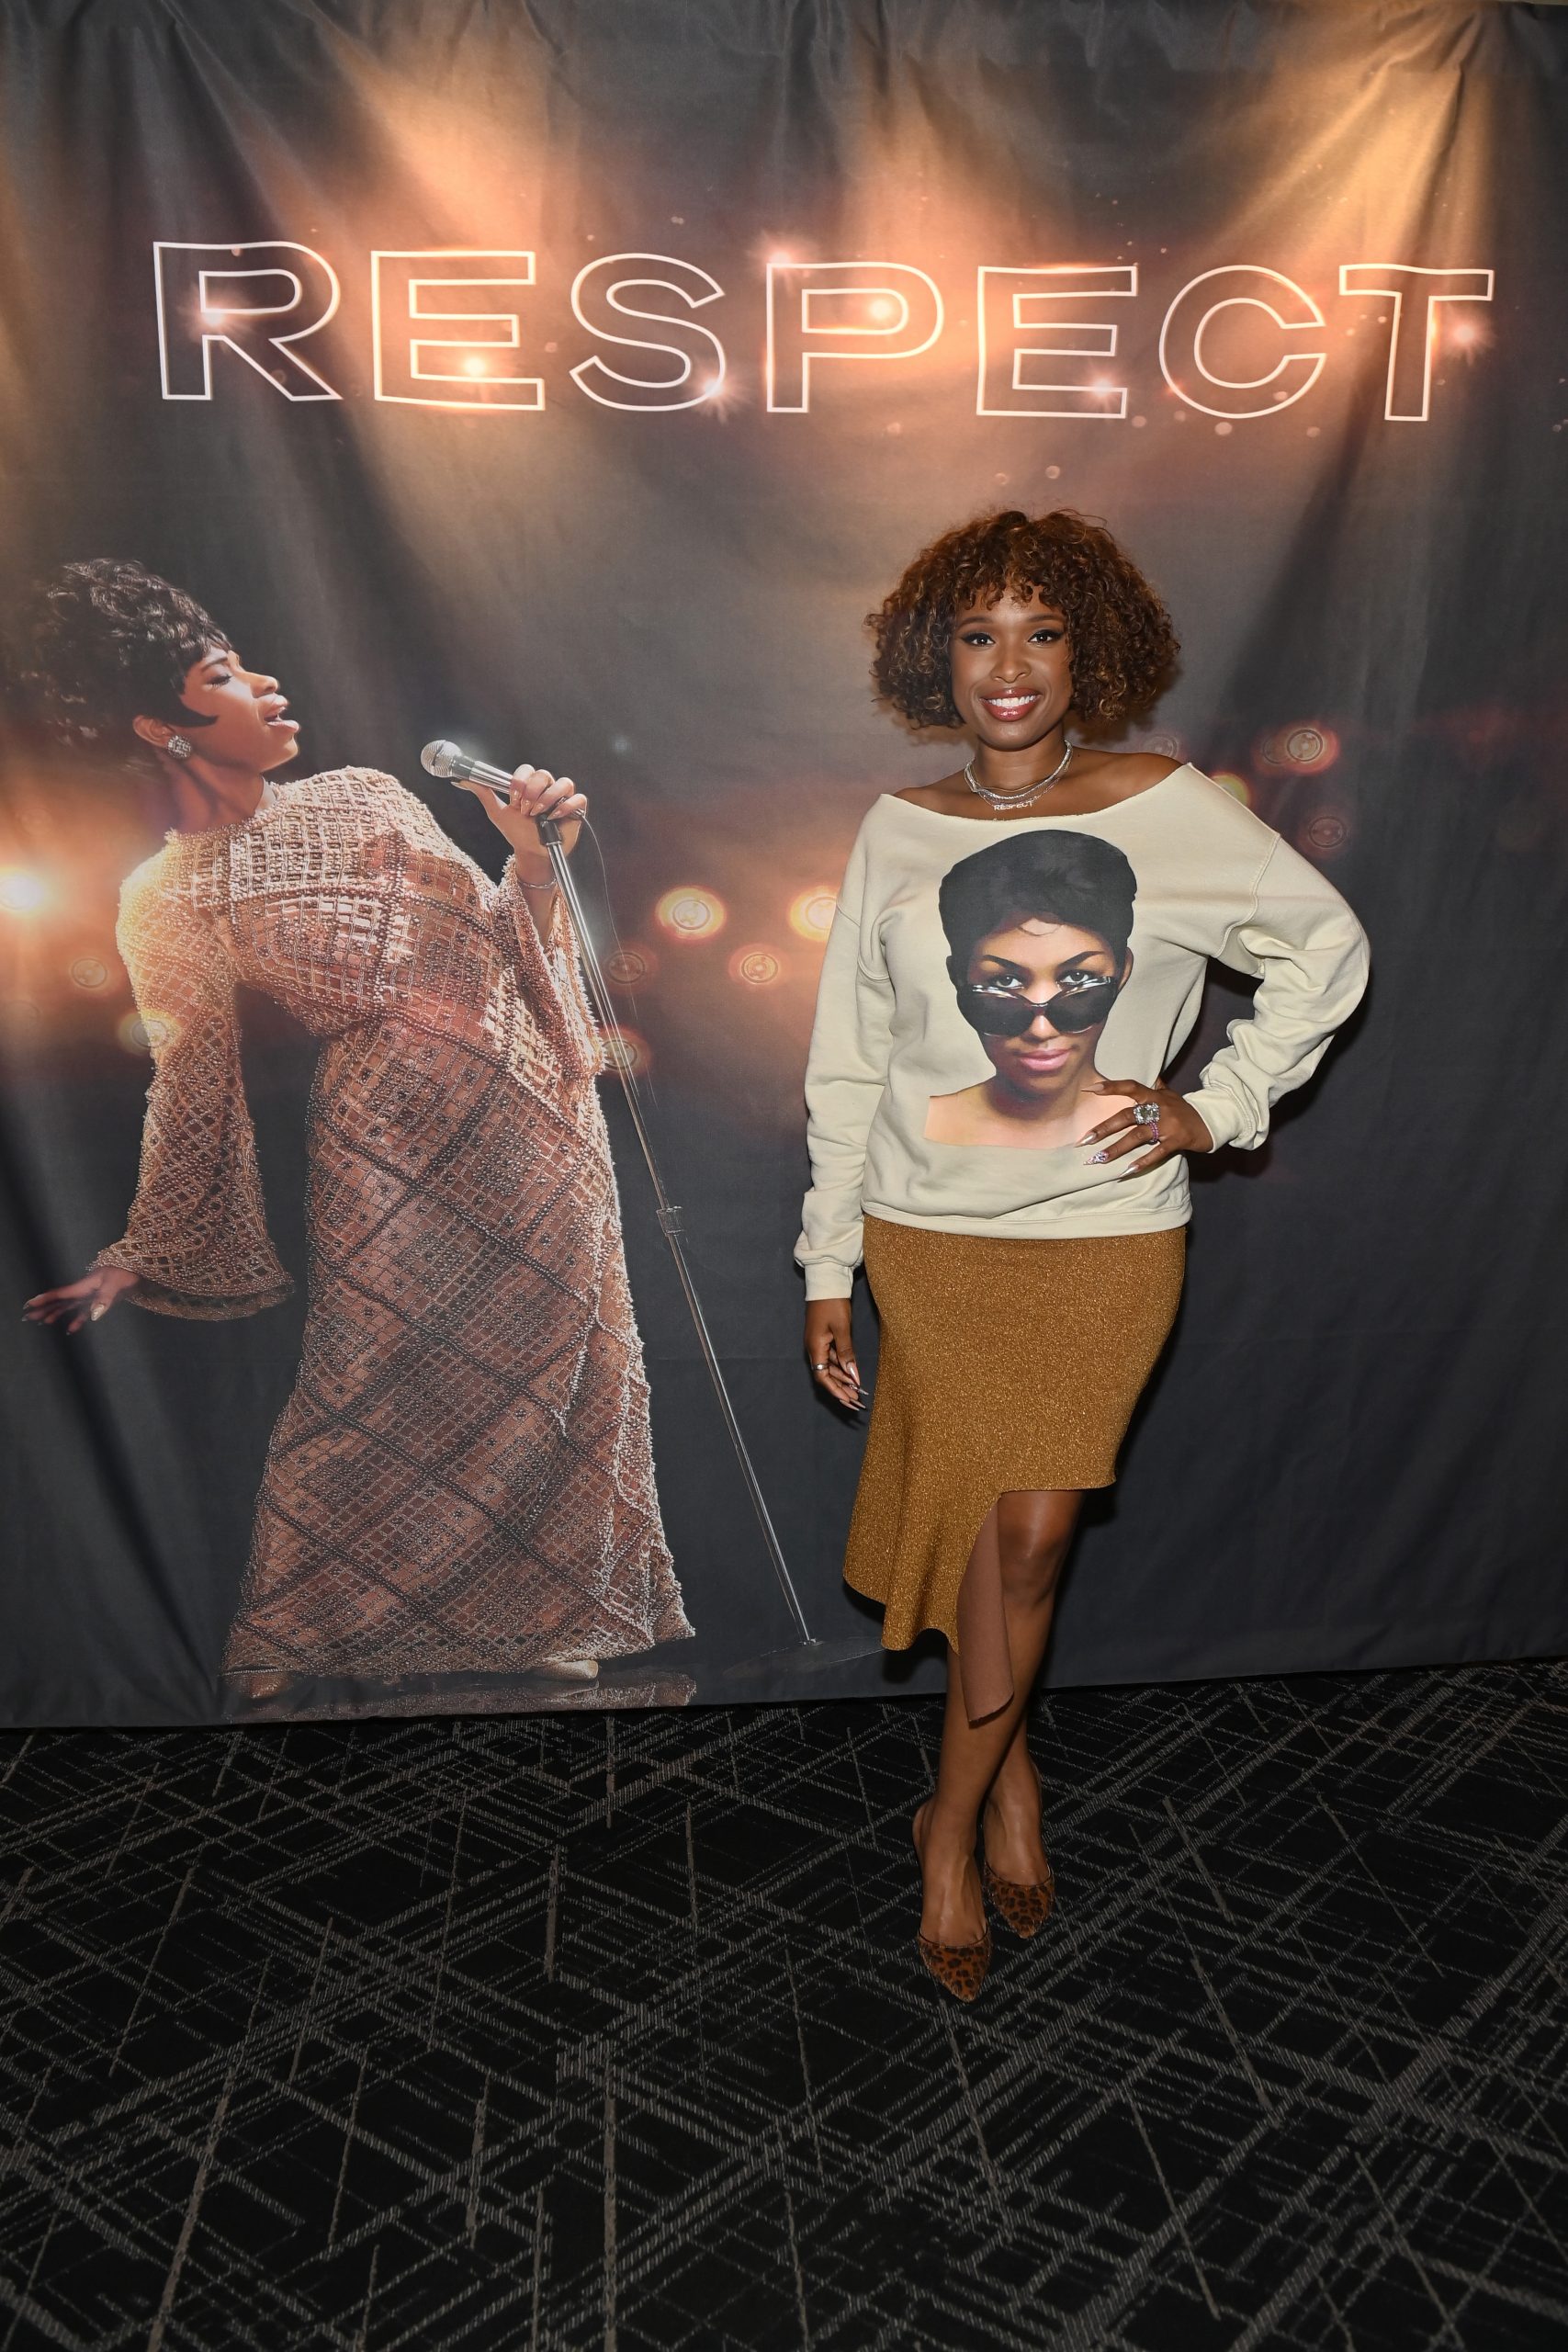 Jennifer Hudson Surprises Fans At A ‘Queens Night Out’ Screening Of Her Movie ‘Respect’ In Atlanta